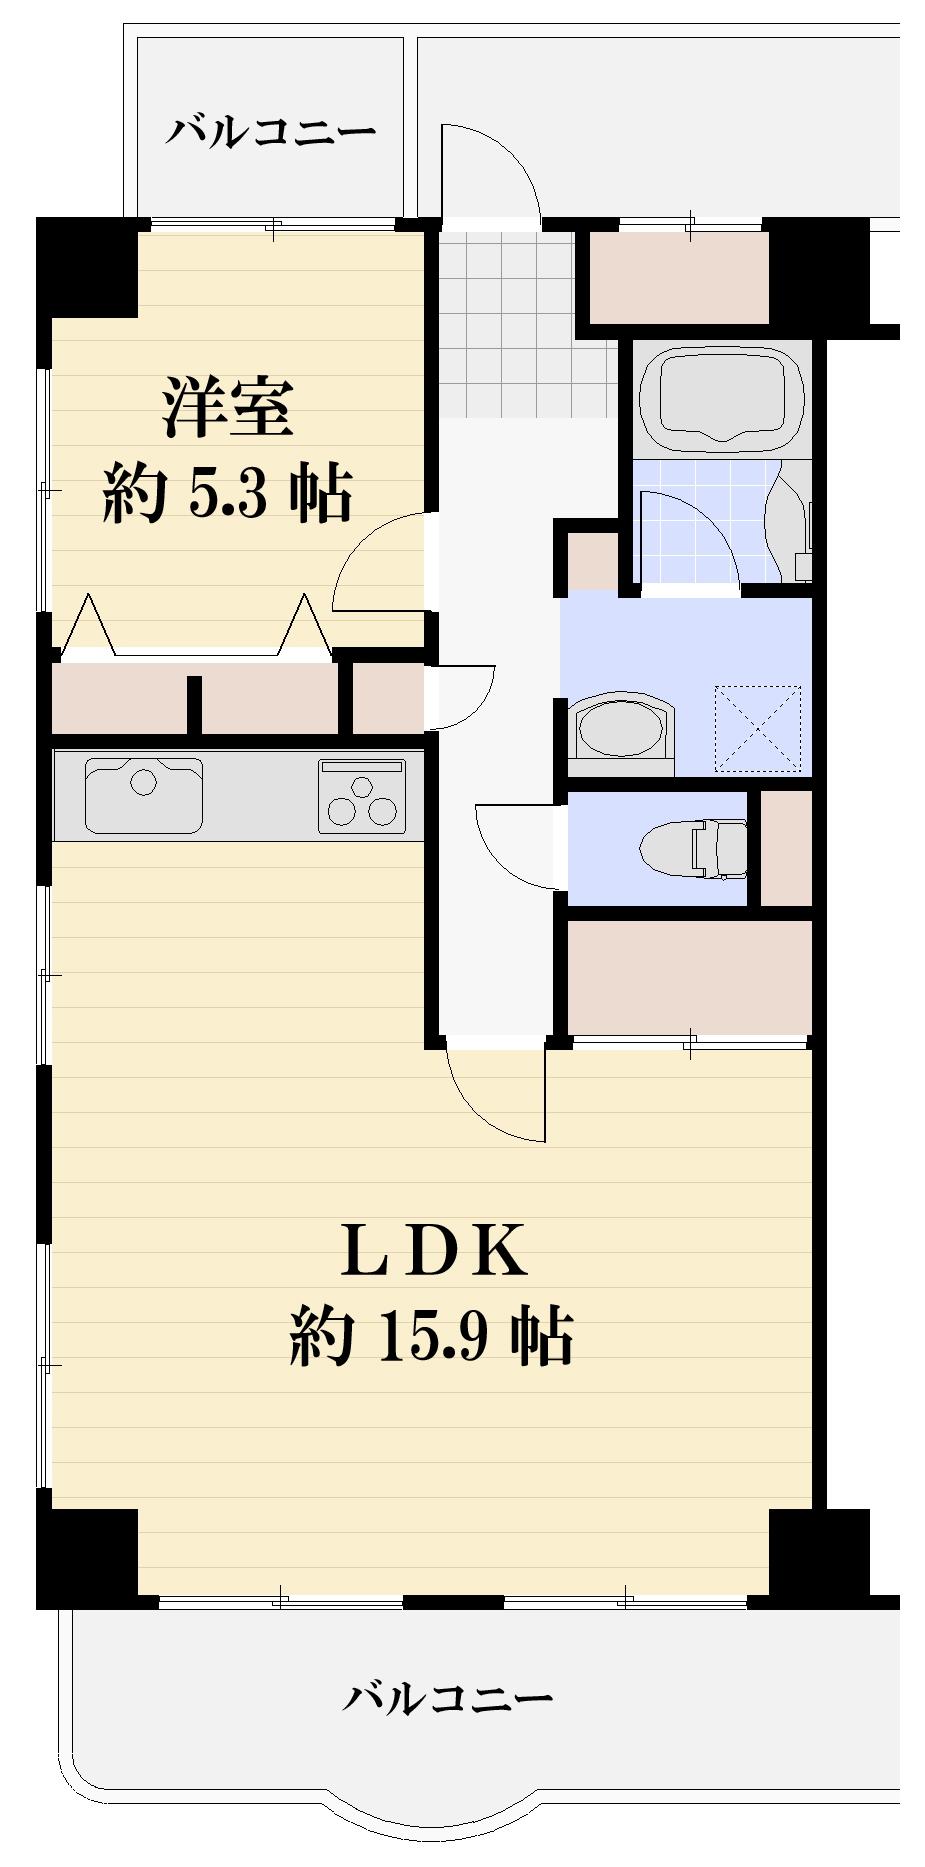 Floor plan. 1LDK, Price 25,800,000 yen, Occupied area 53.35 sq m , Balcony area 9.65 sq m east ・ South ・ It is west of the 3 direction room. Not suitable to hate towards the sun. Until the evening from the morning is bright rooms yours.